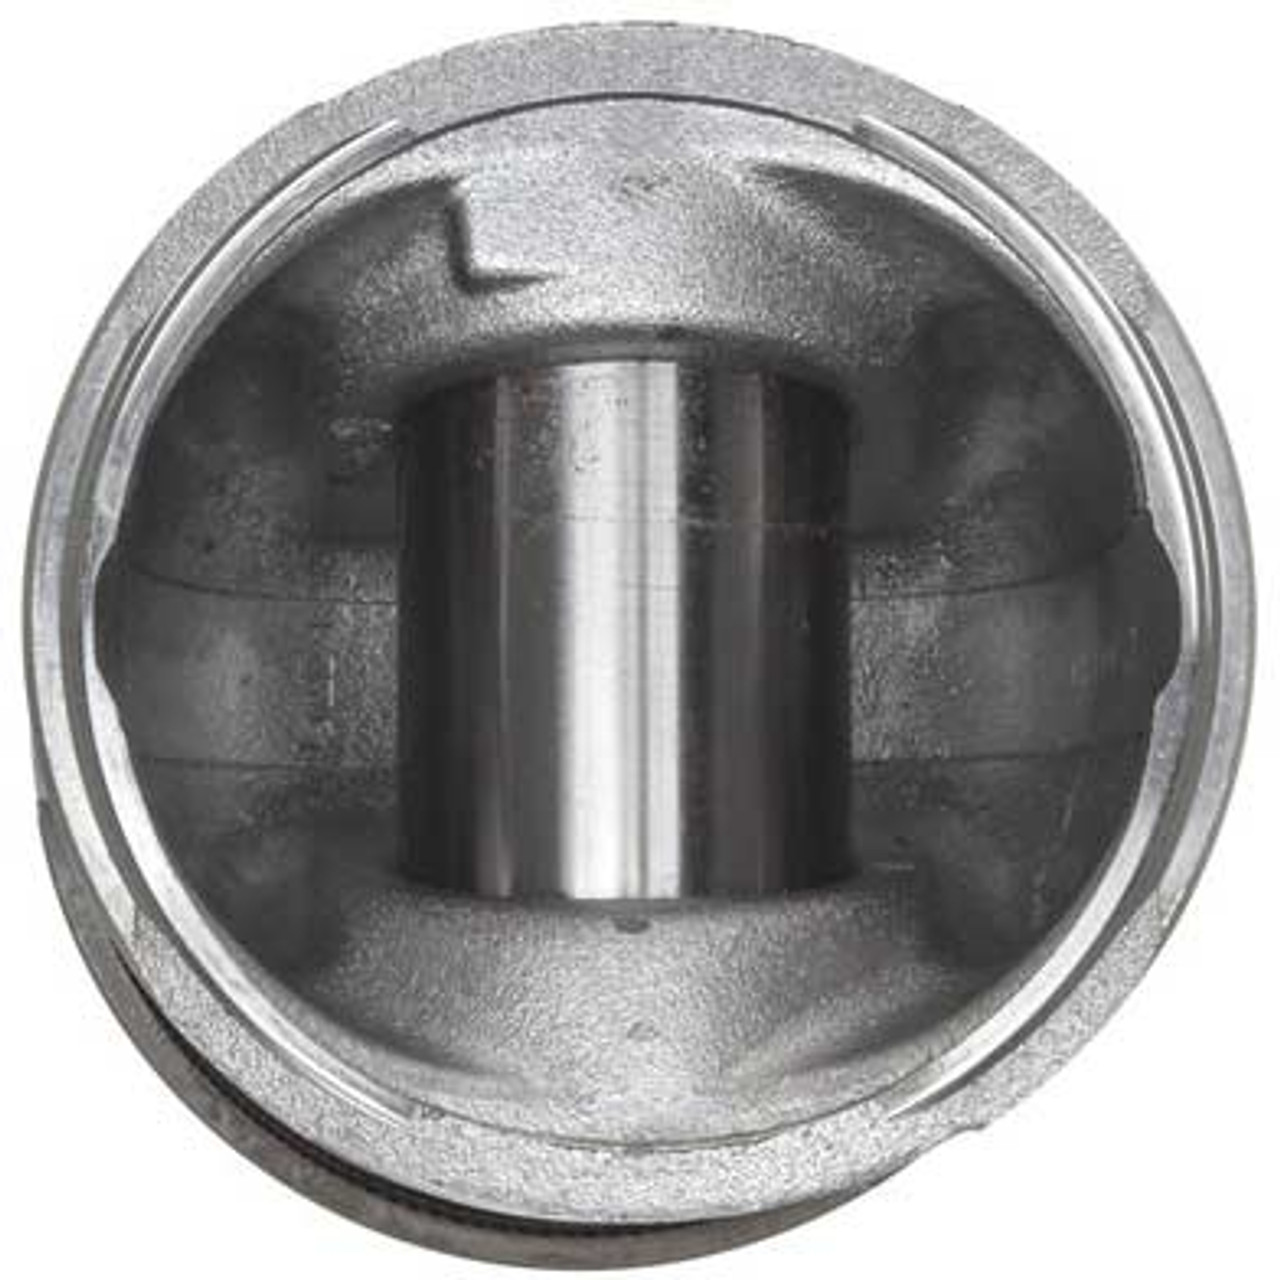 MAHLE PISTON WITH RINGS (.040)Bottom View